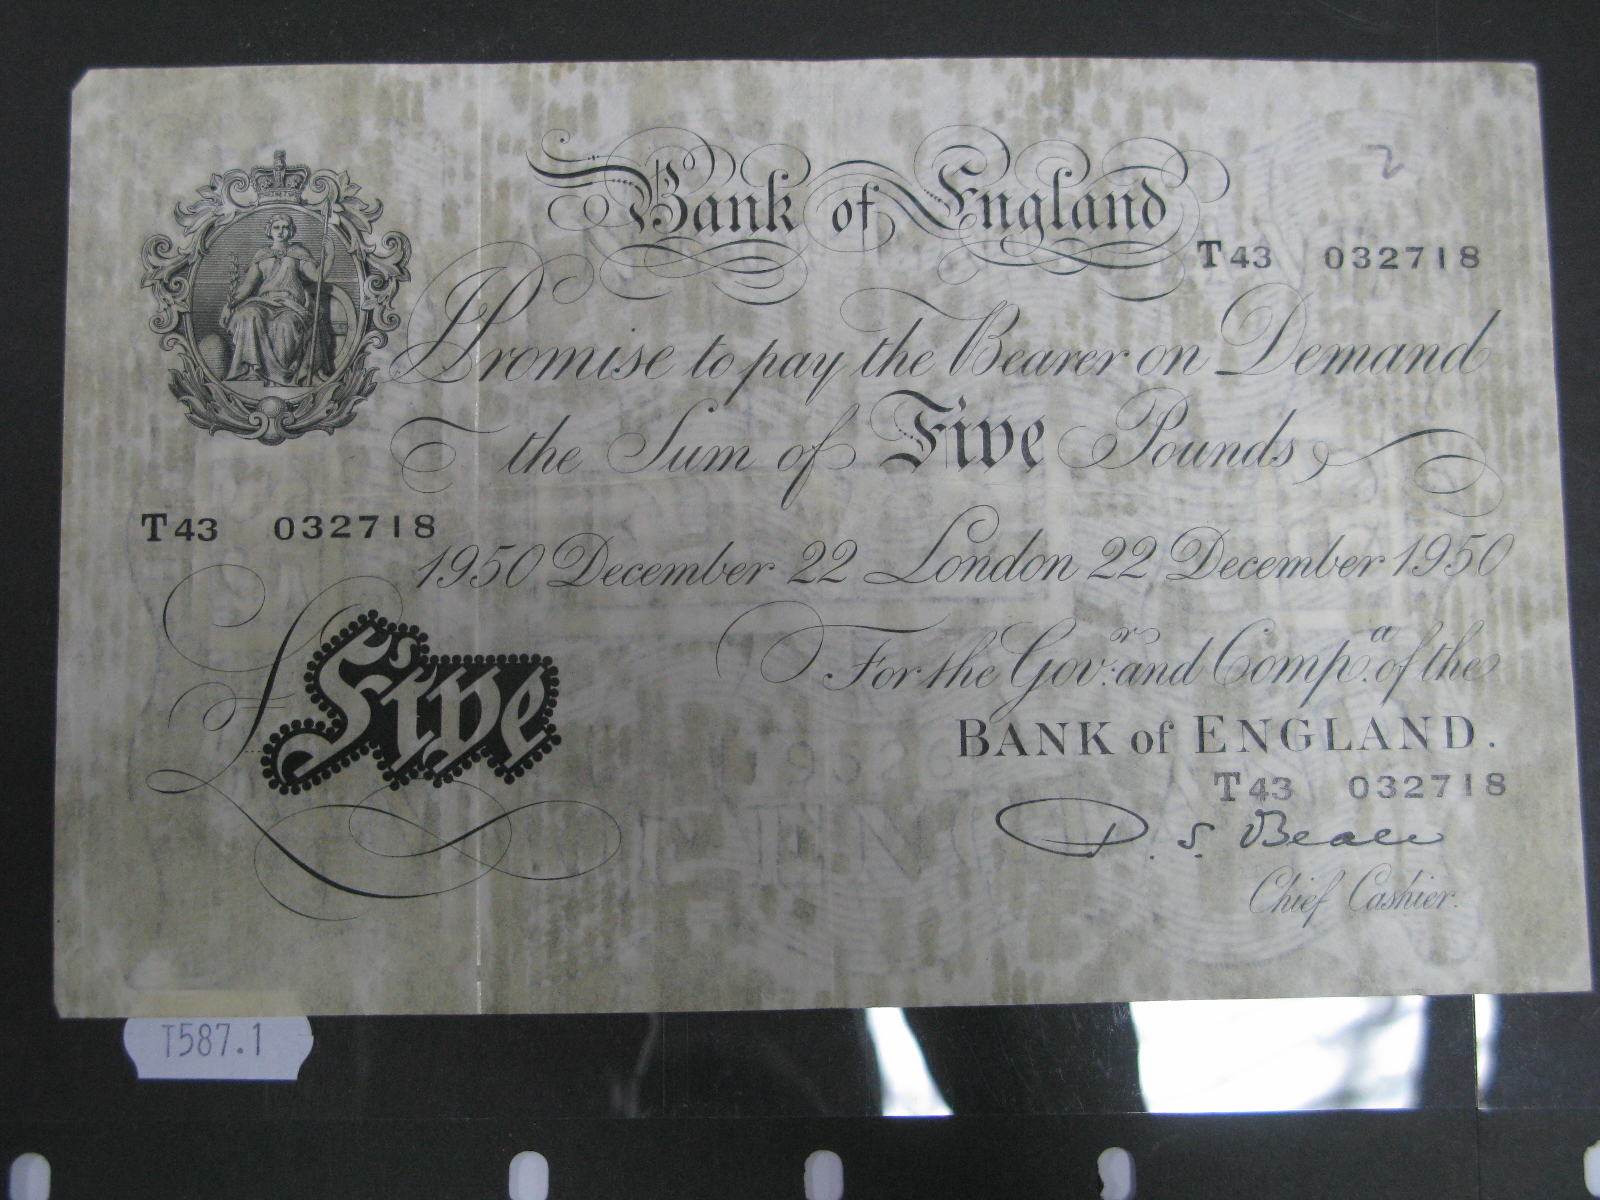 Bank of England Five Pounds Banknote, (Chief Cashier - P.S. Beale) London, 22 December 1950, T43